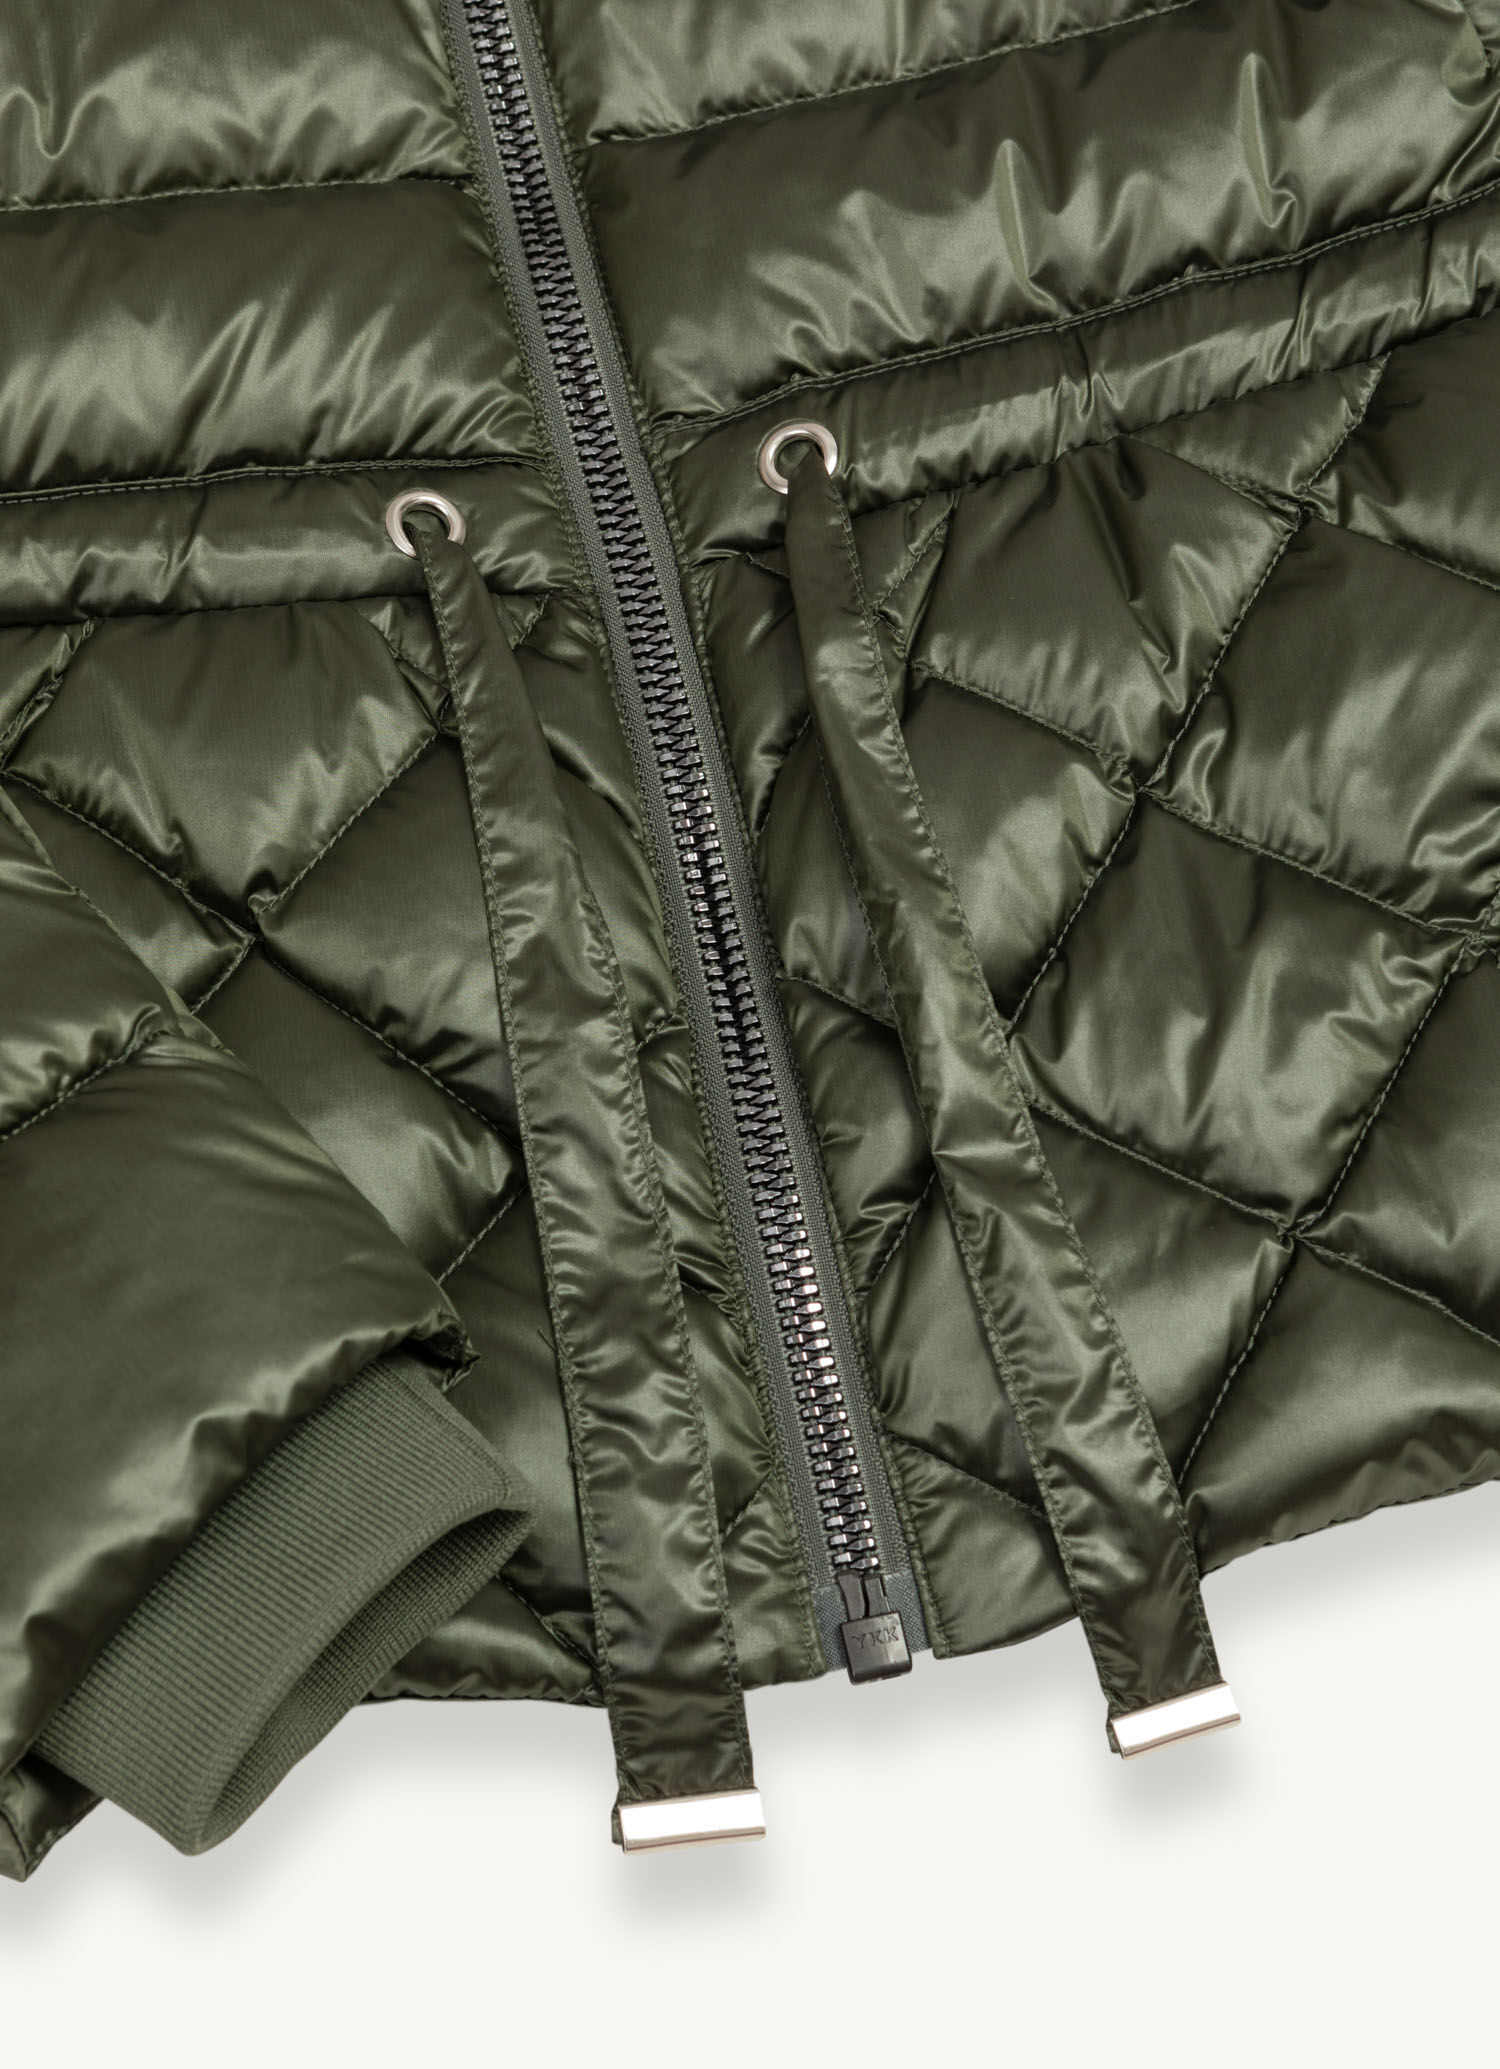 Iridescent diamond quilted jacket with drawstring